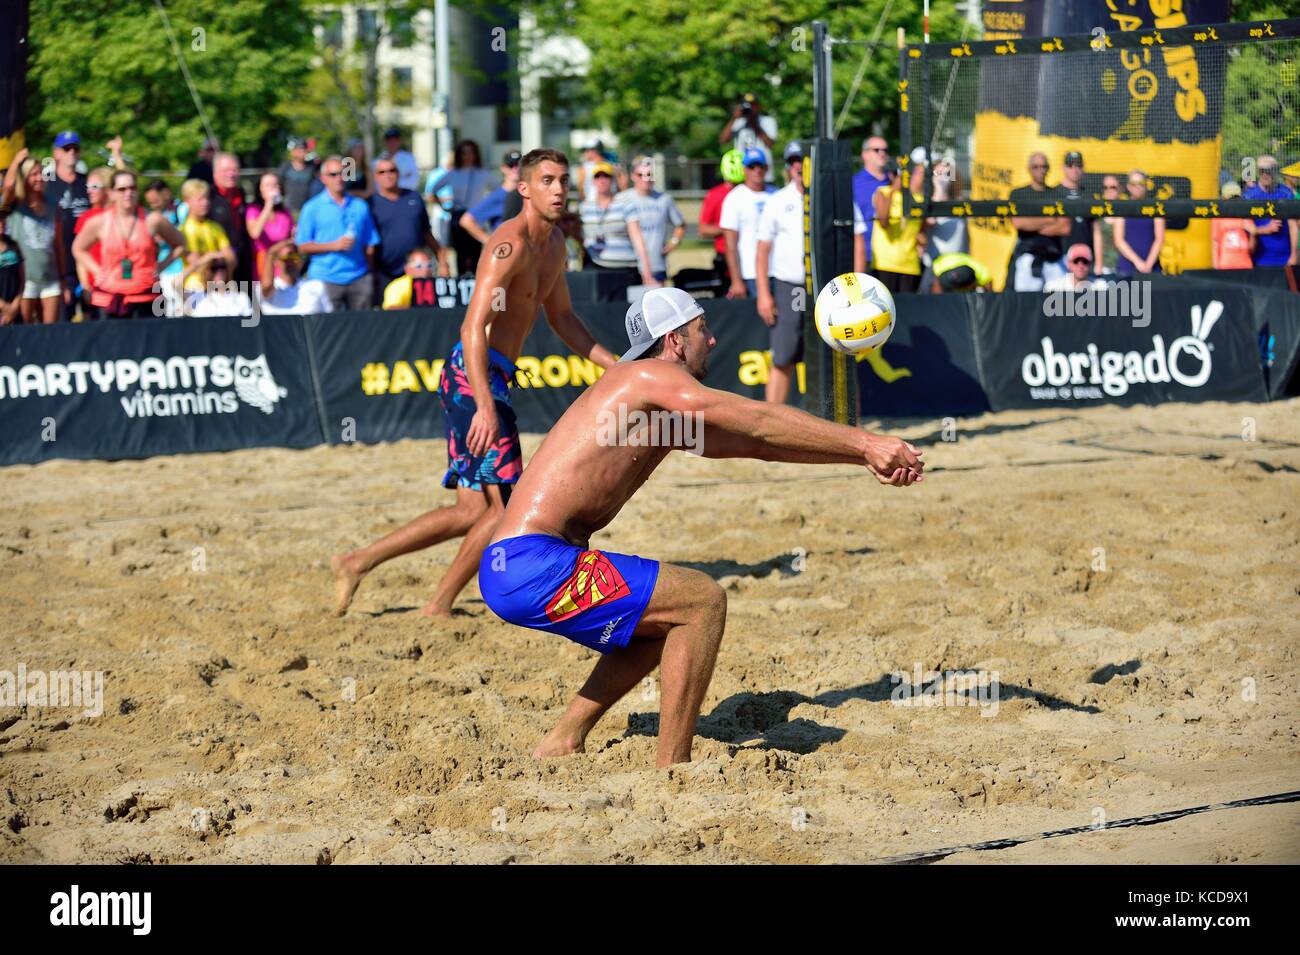 Player performing shot to set up partner for a kill shot  at the AVP 2017 Men’s Chicago Championships. Chicago, Illinois, USA. Stock Photo